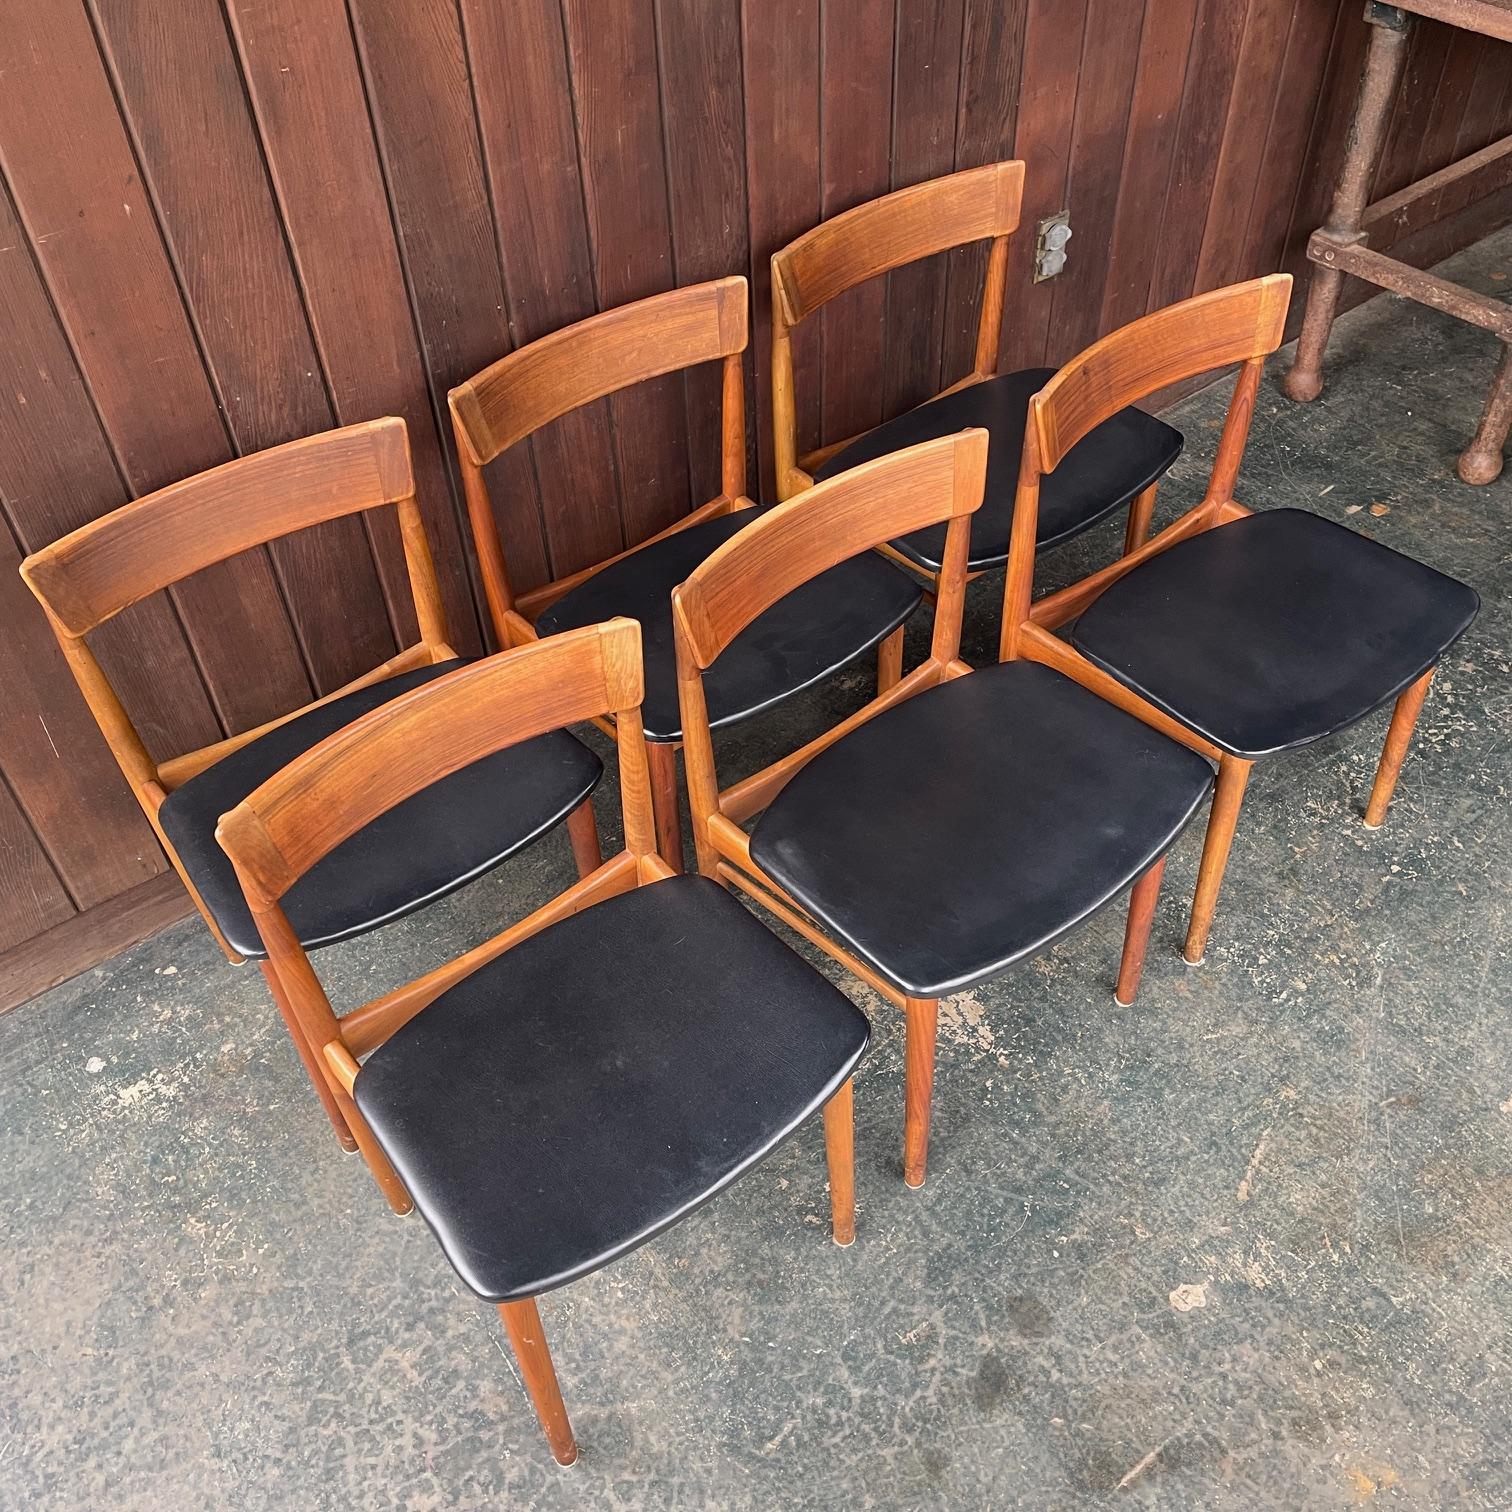 I prefer to sell my vintage and antique pieces in the condition it was at the time of procurement. This is a set of 6 included in this sale. All usable as-is with Danish markings underneath each seat. 

These are overall a very decent as-is/